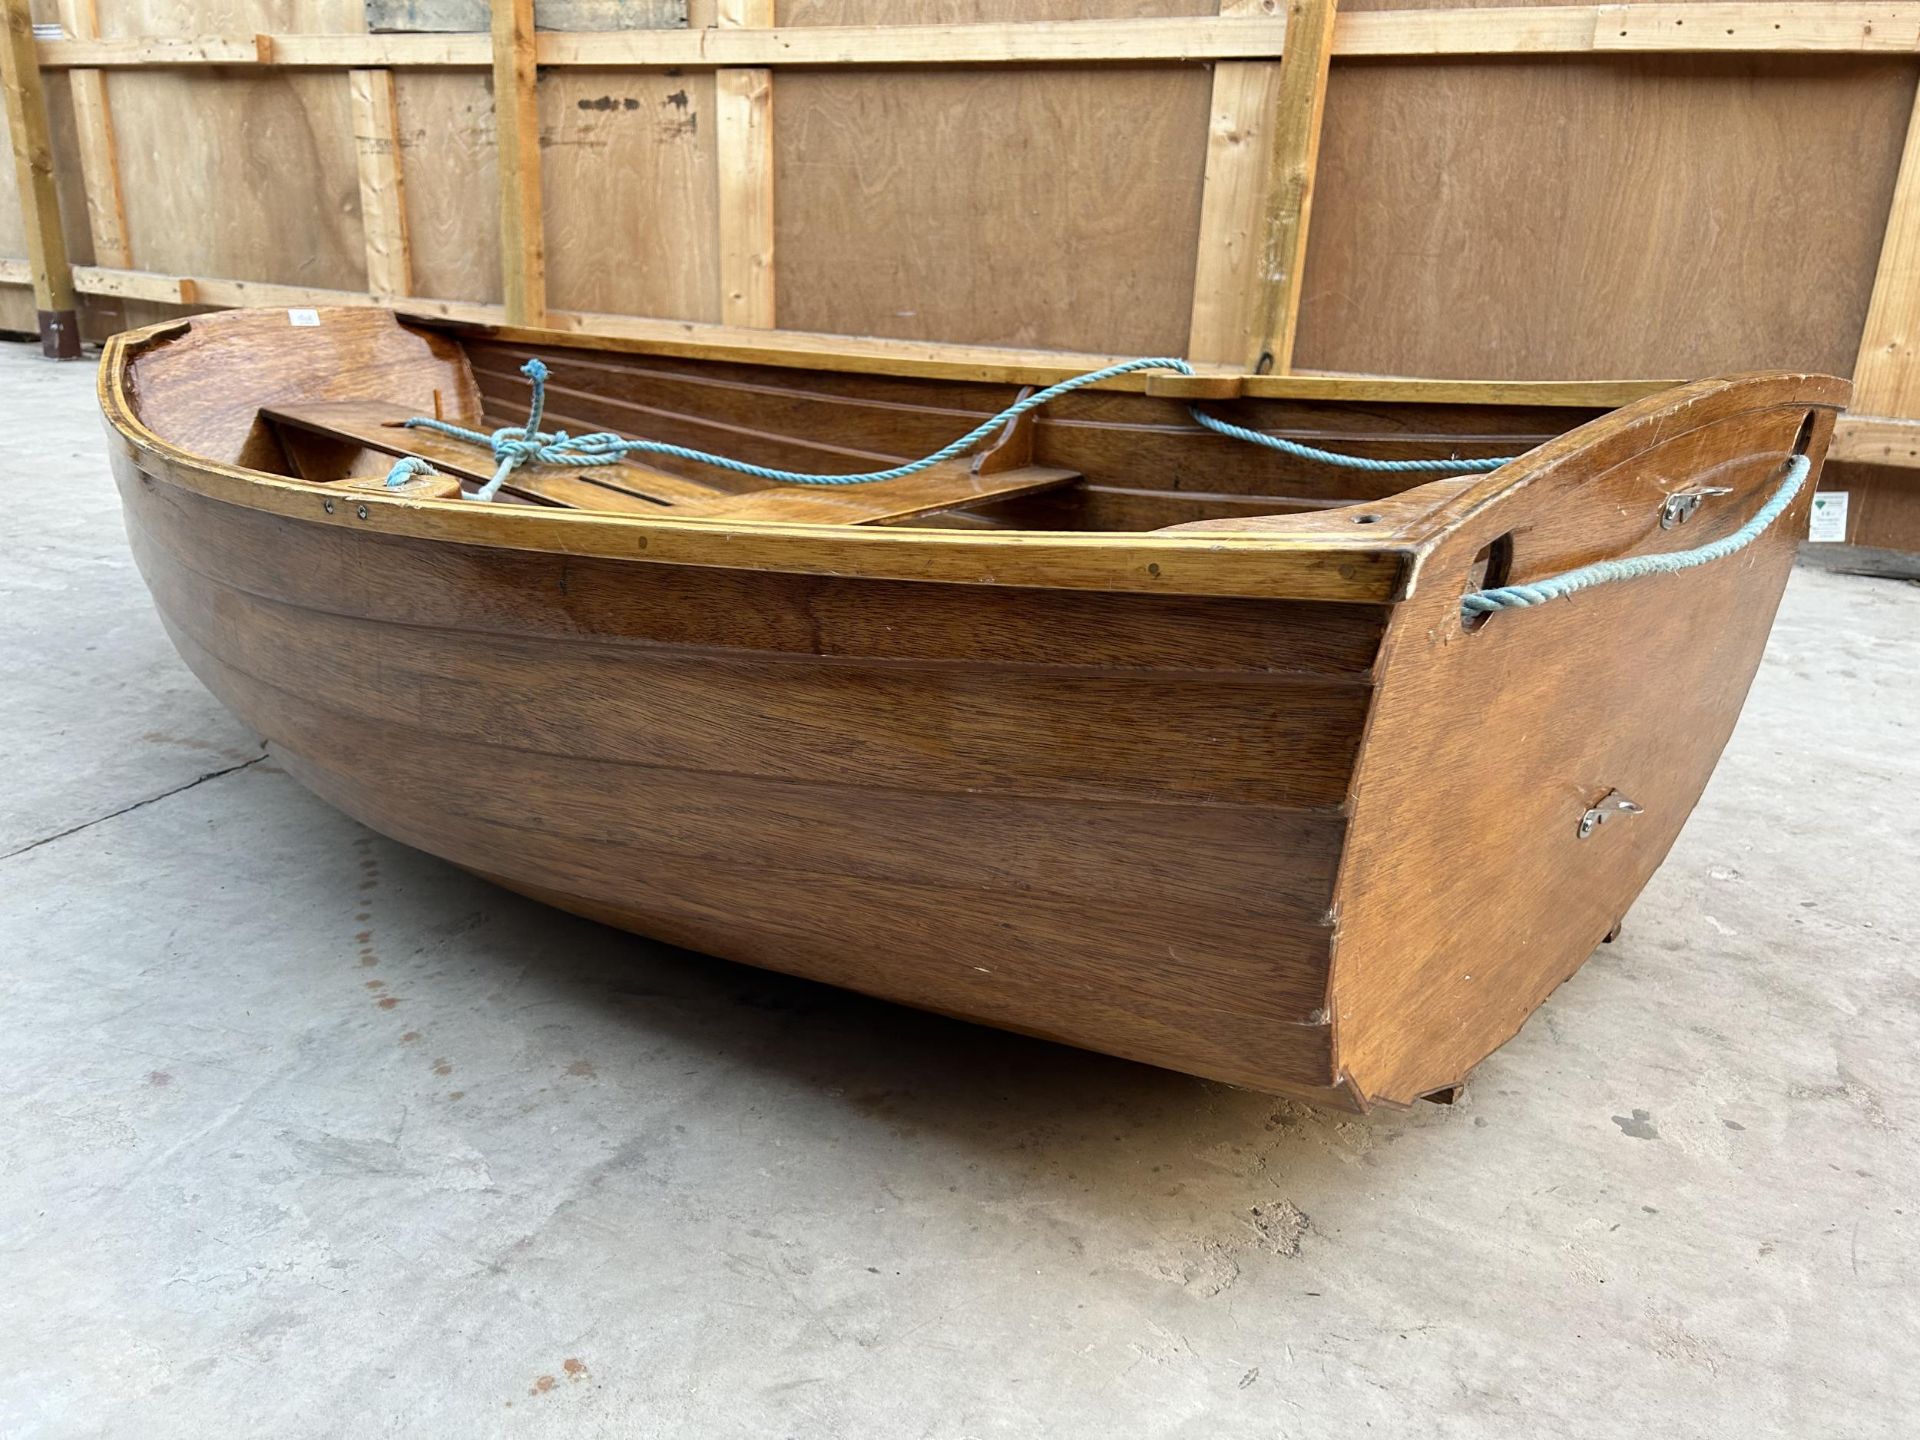 A VINTAGE HARD WOOD ROWING BOAT WITH INTERNAL SEATING (L:187CM W:107CM) - Image 6 of 6